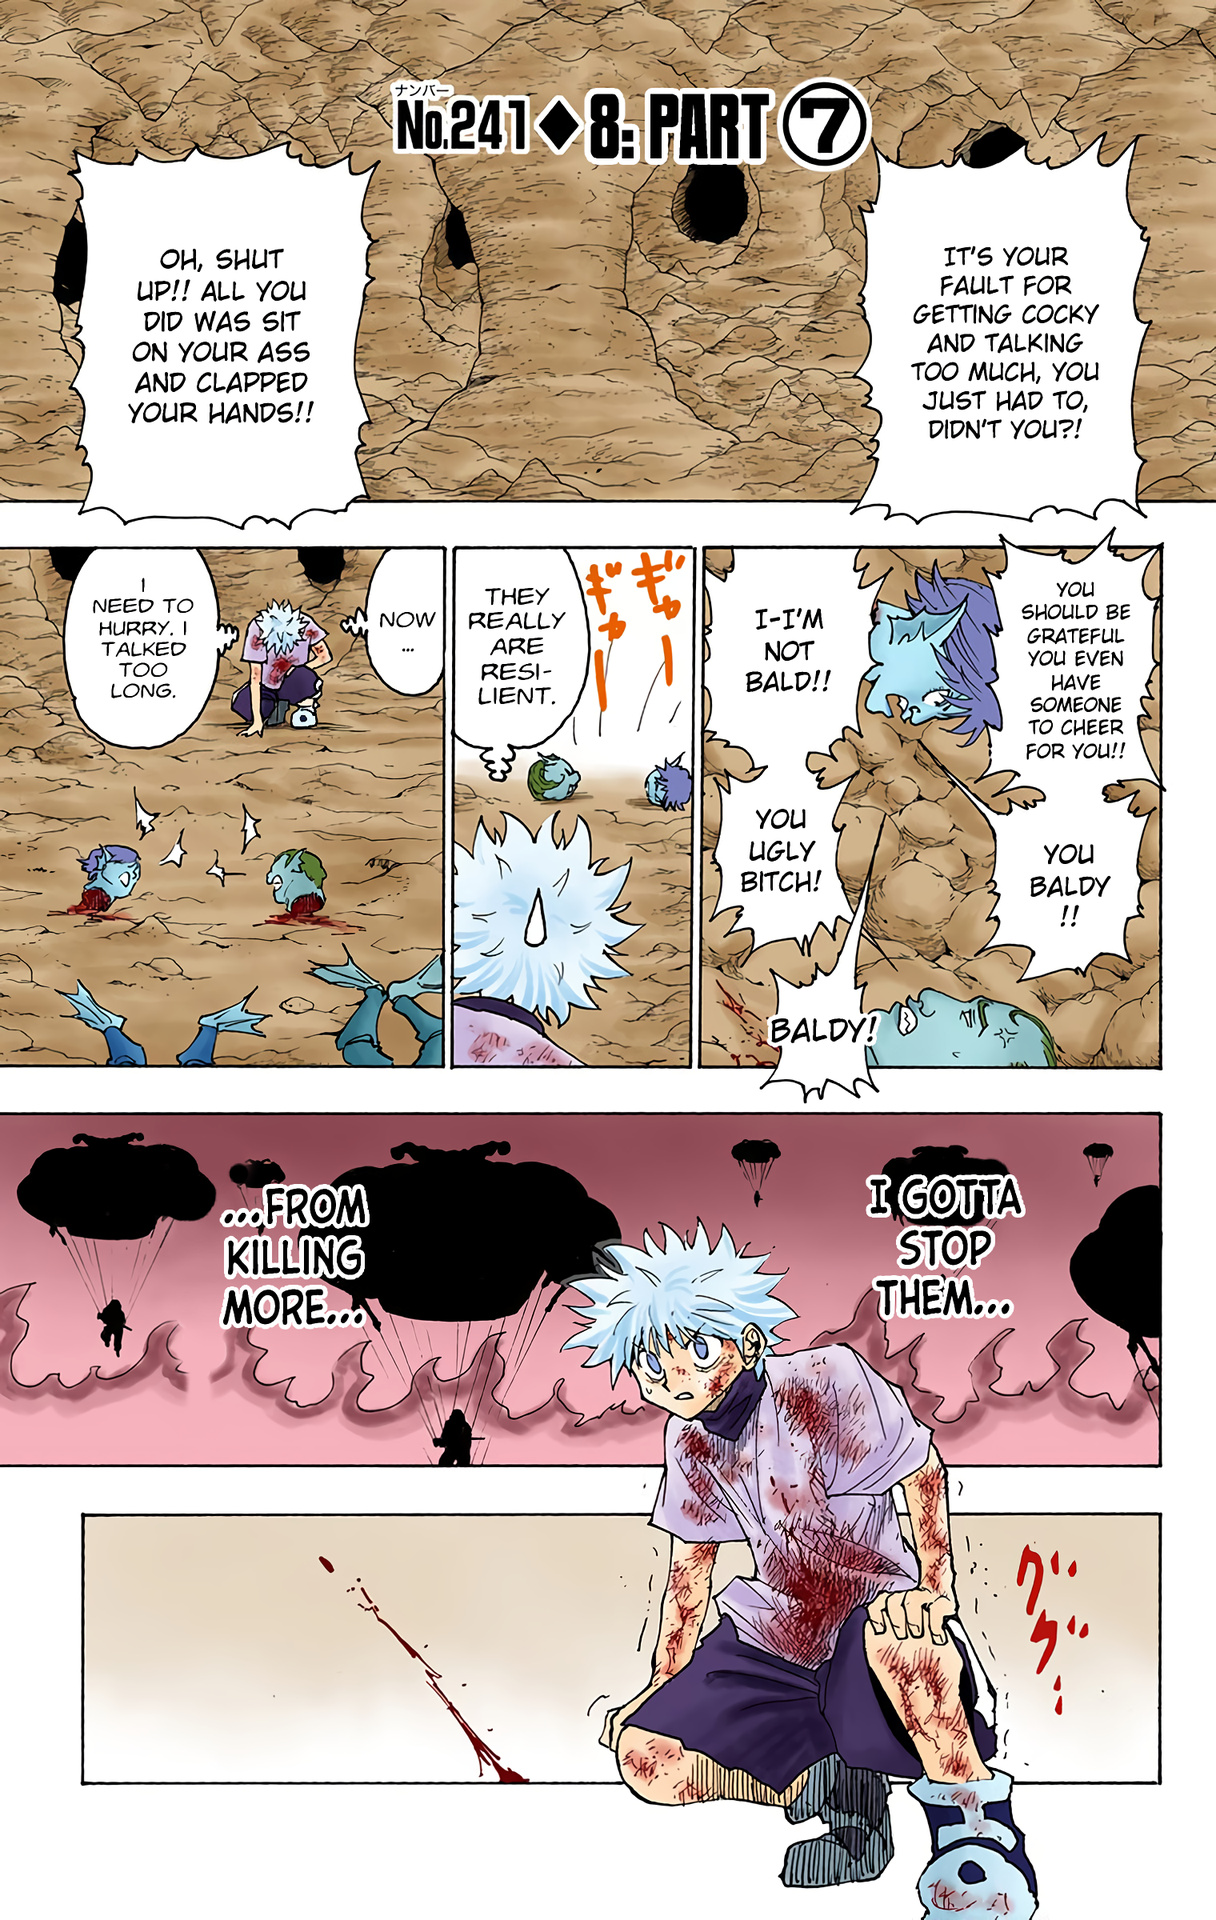 Hunter X Hunter Full Color Vol.23 Chapter 241: 8: Part 7 - Picture 1